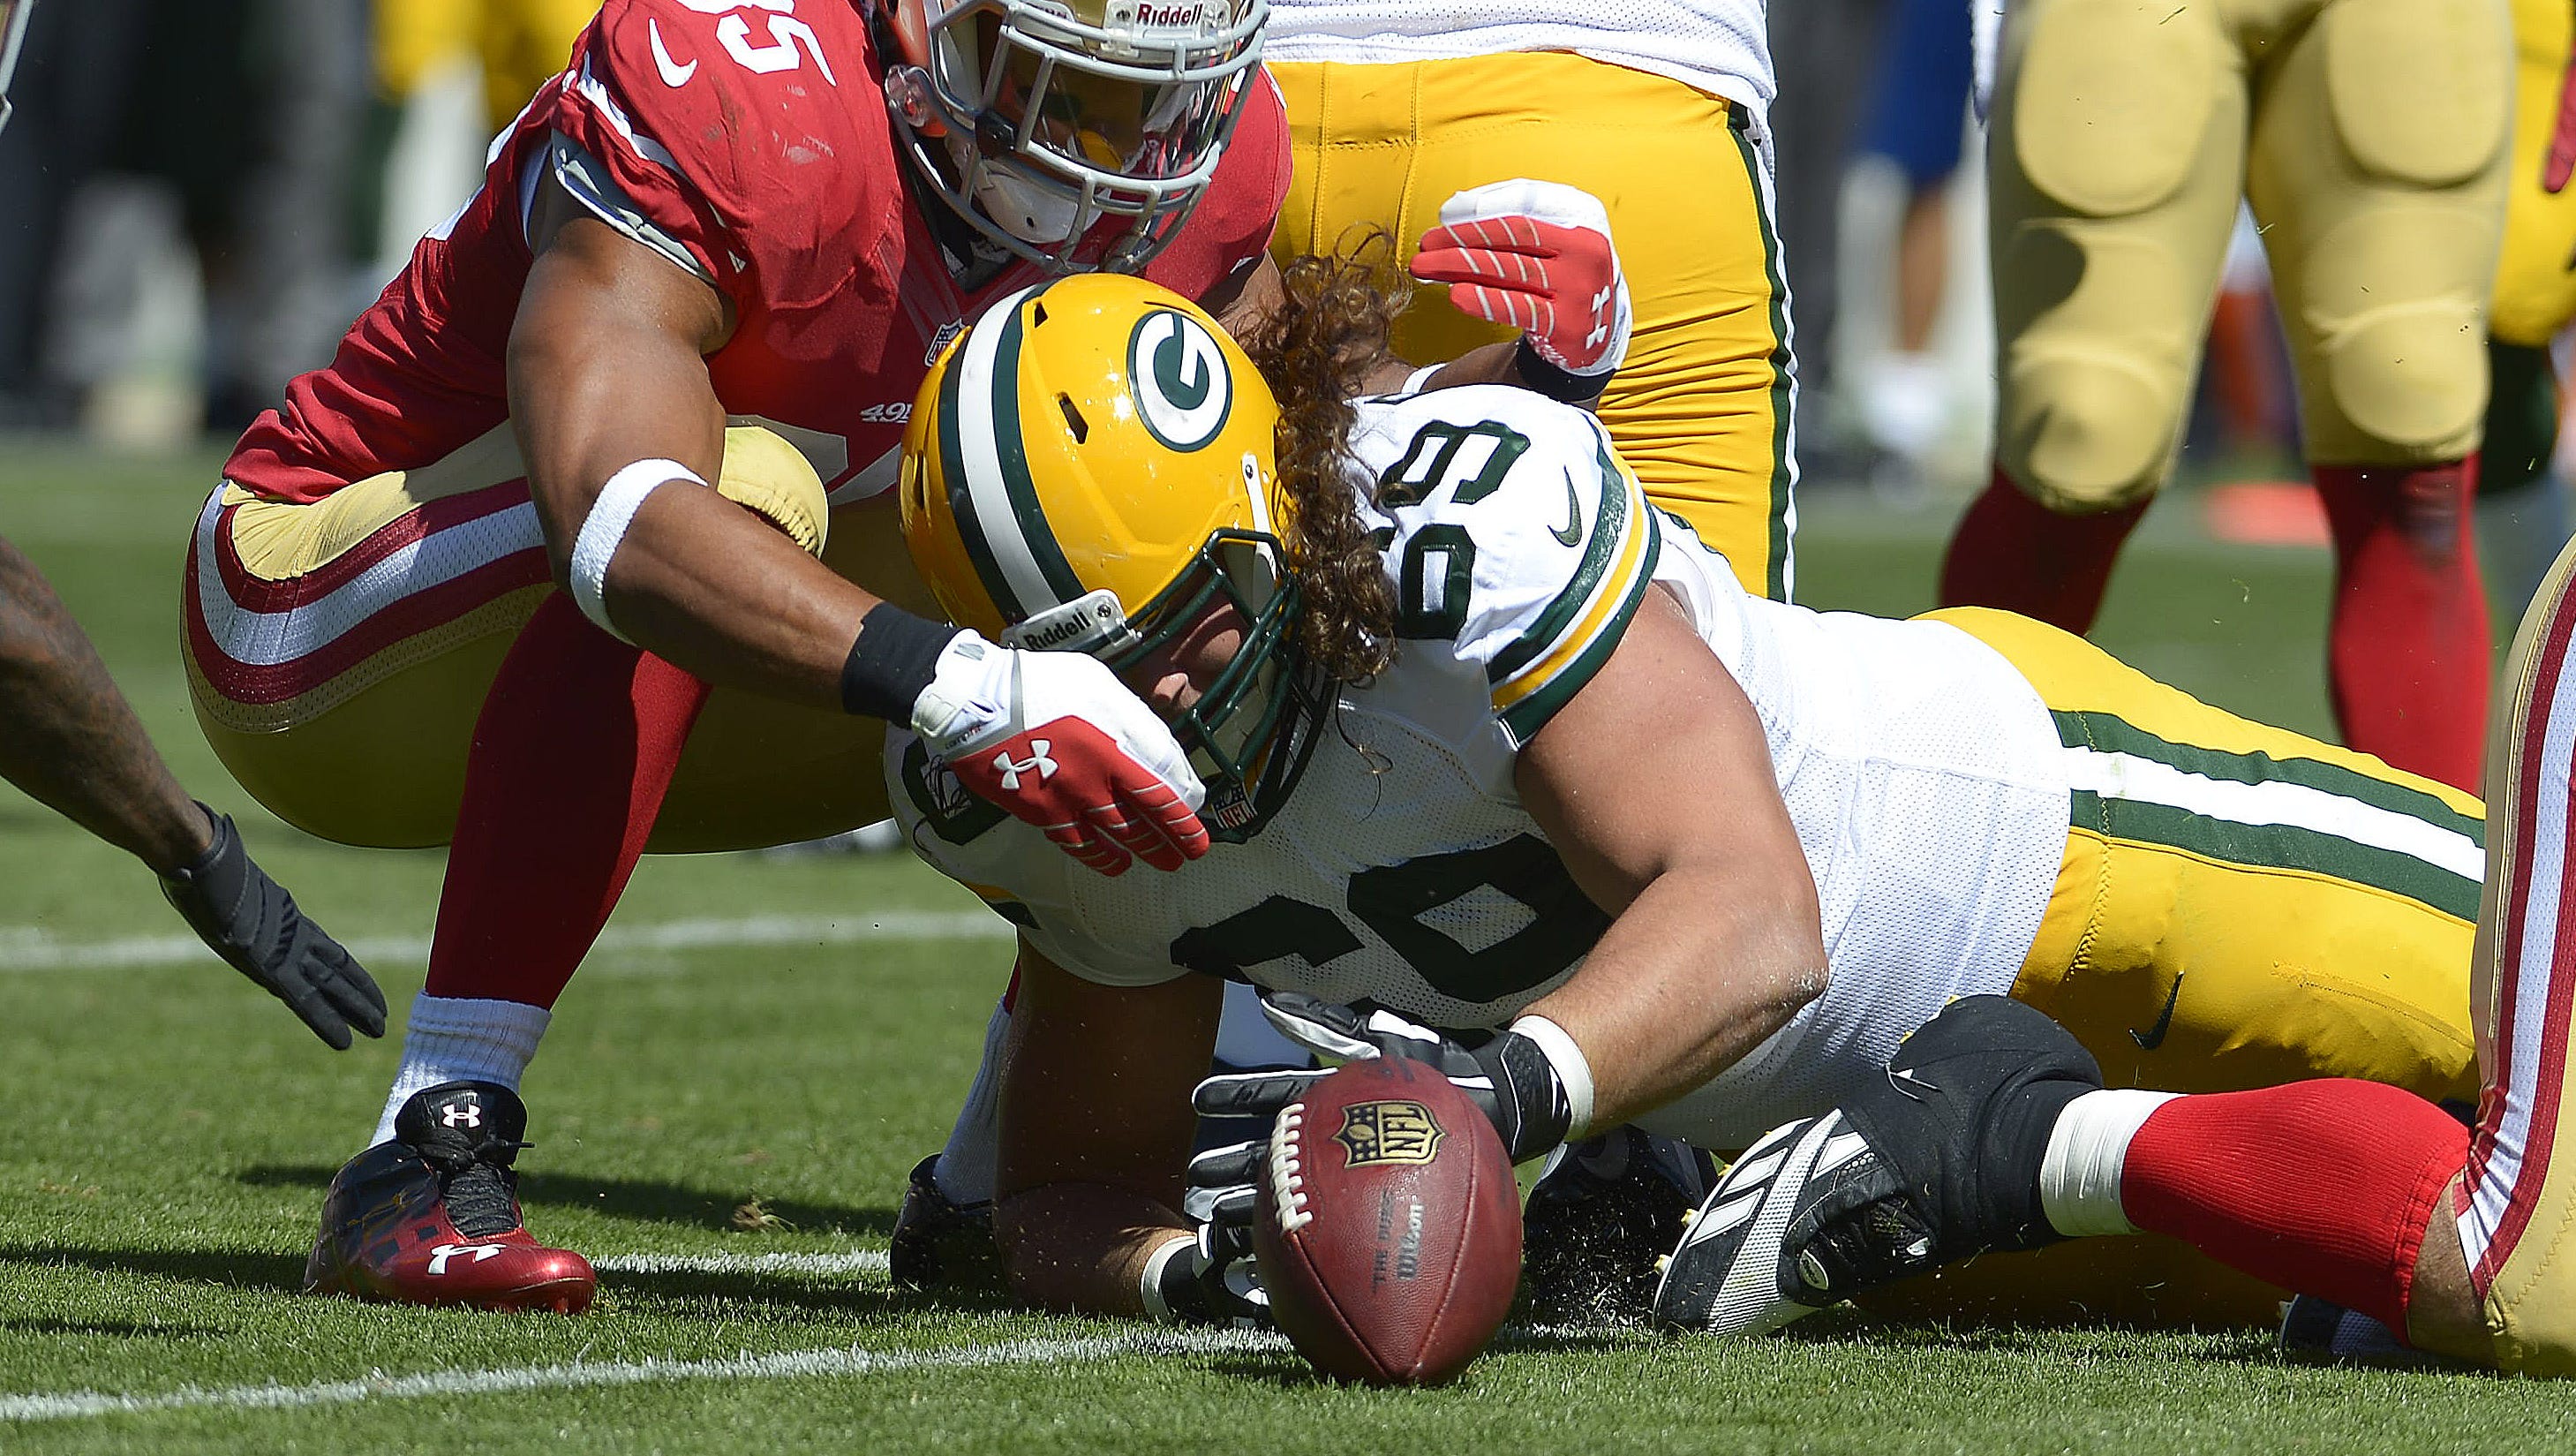 Green Bay Packers lineman David Bakhtiari (69) tries to grab a fumble against the San Francisco 49ers on Sept. 8, 2013.